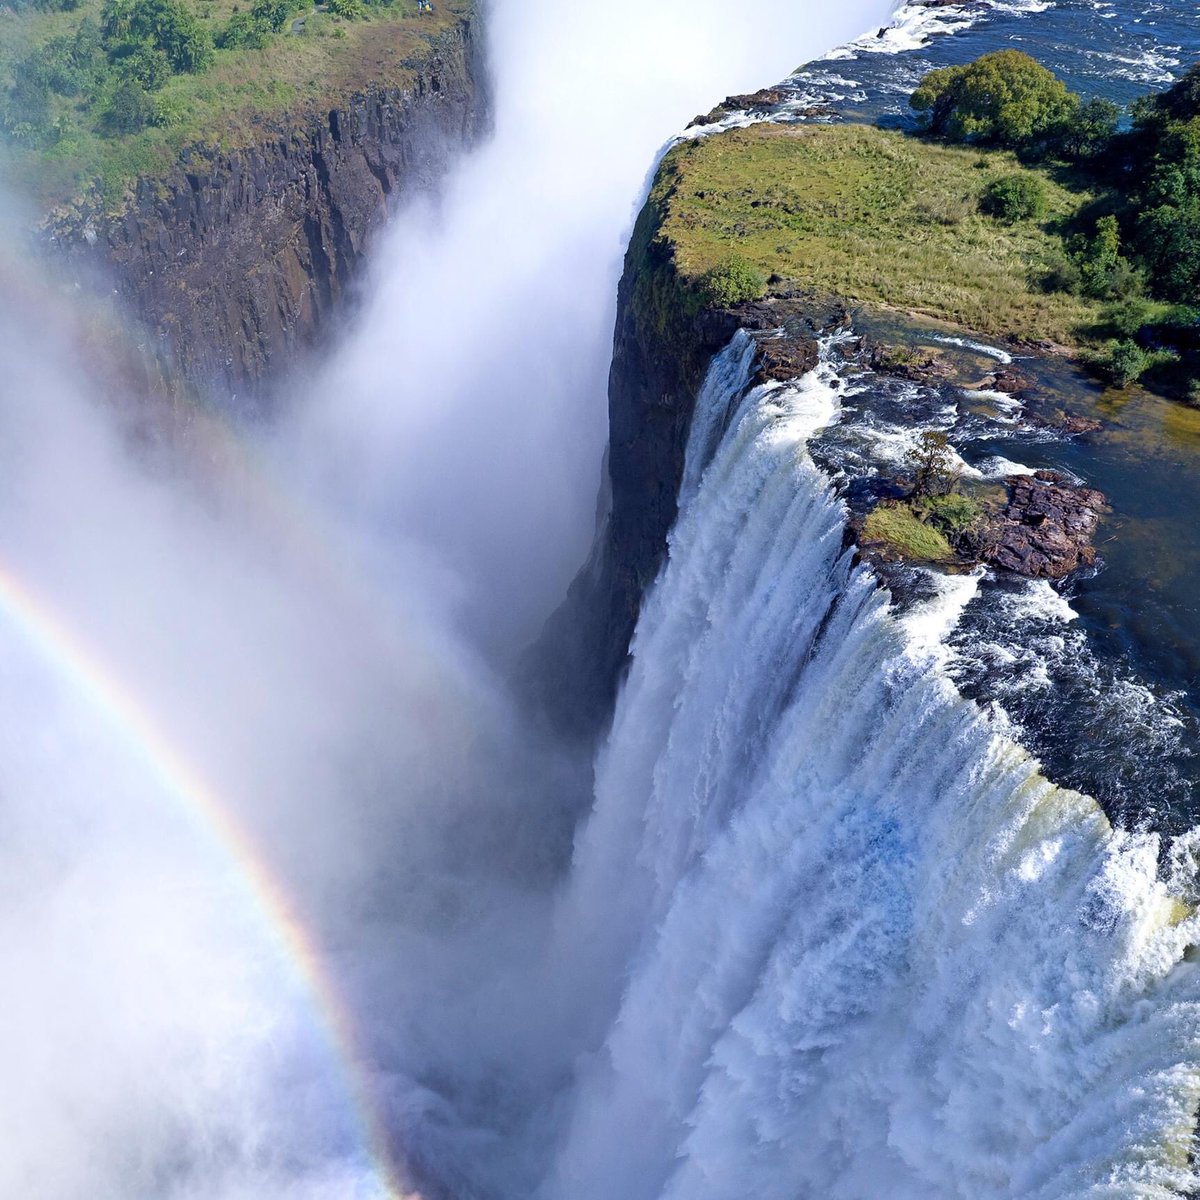 Happy #worldtourismday from one of the most beautiful destinations around the world! #VictoriaFalls💛